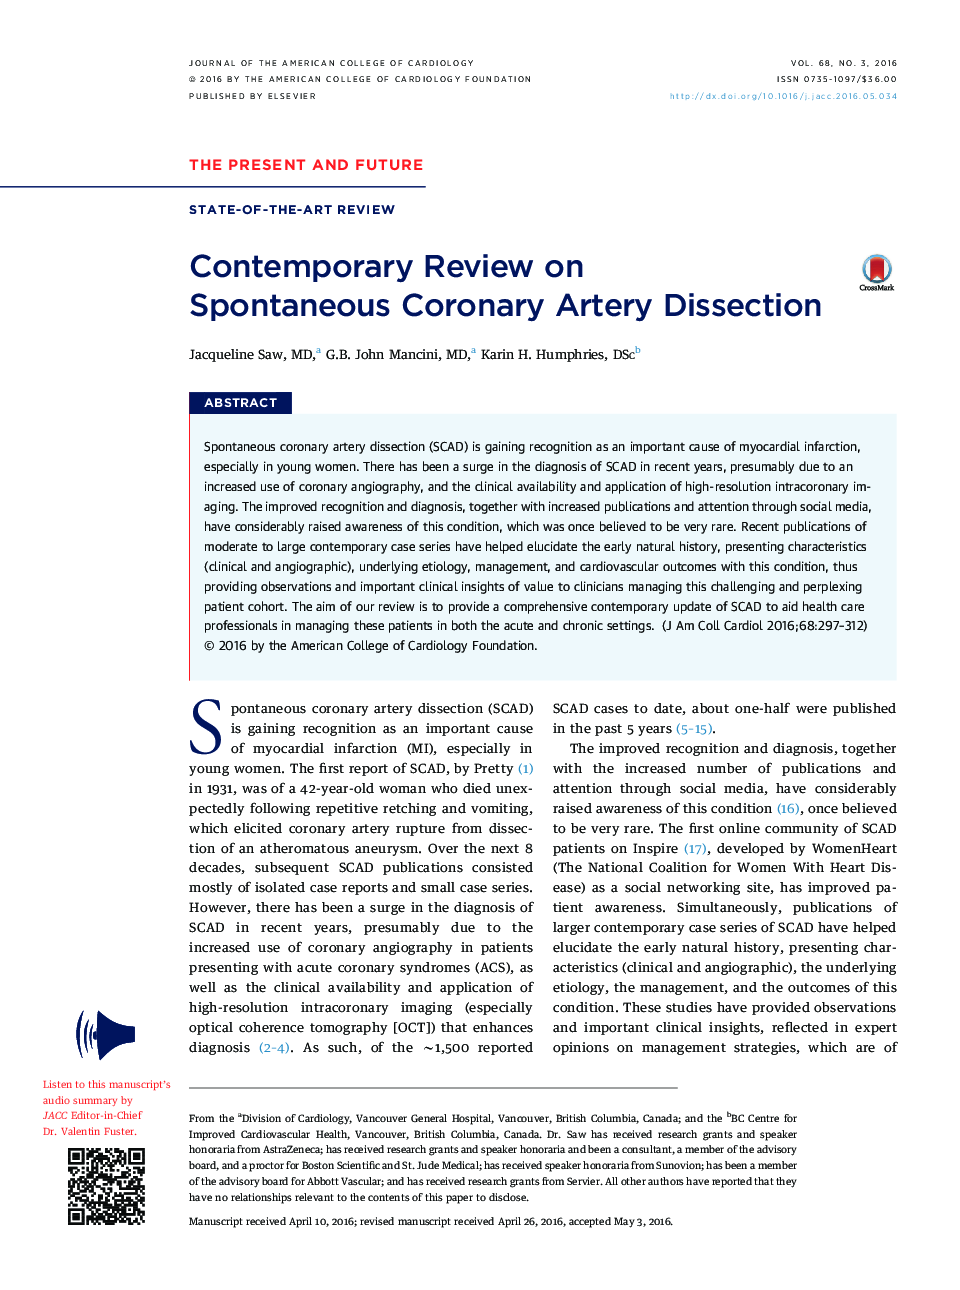 Contemporary Review on Spontaneous Coronary Artery Dissection